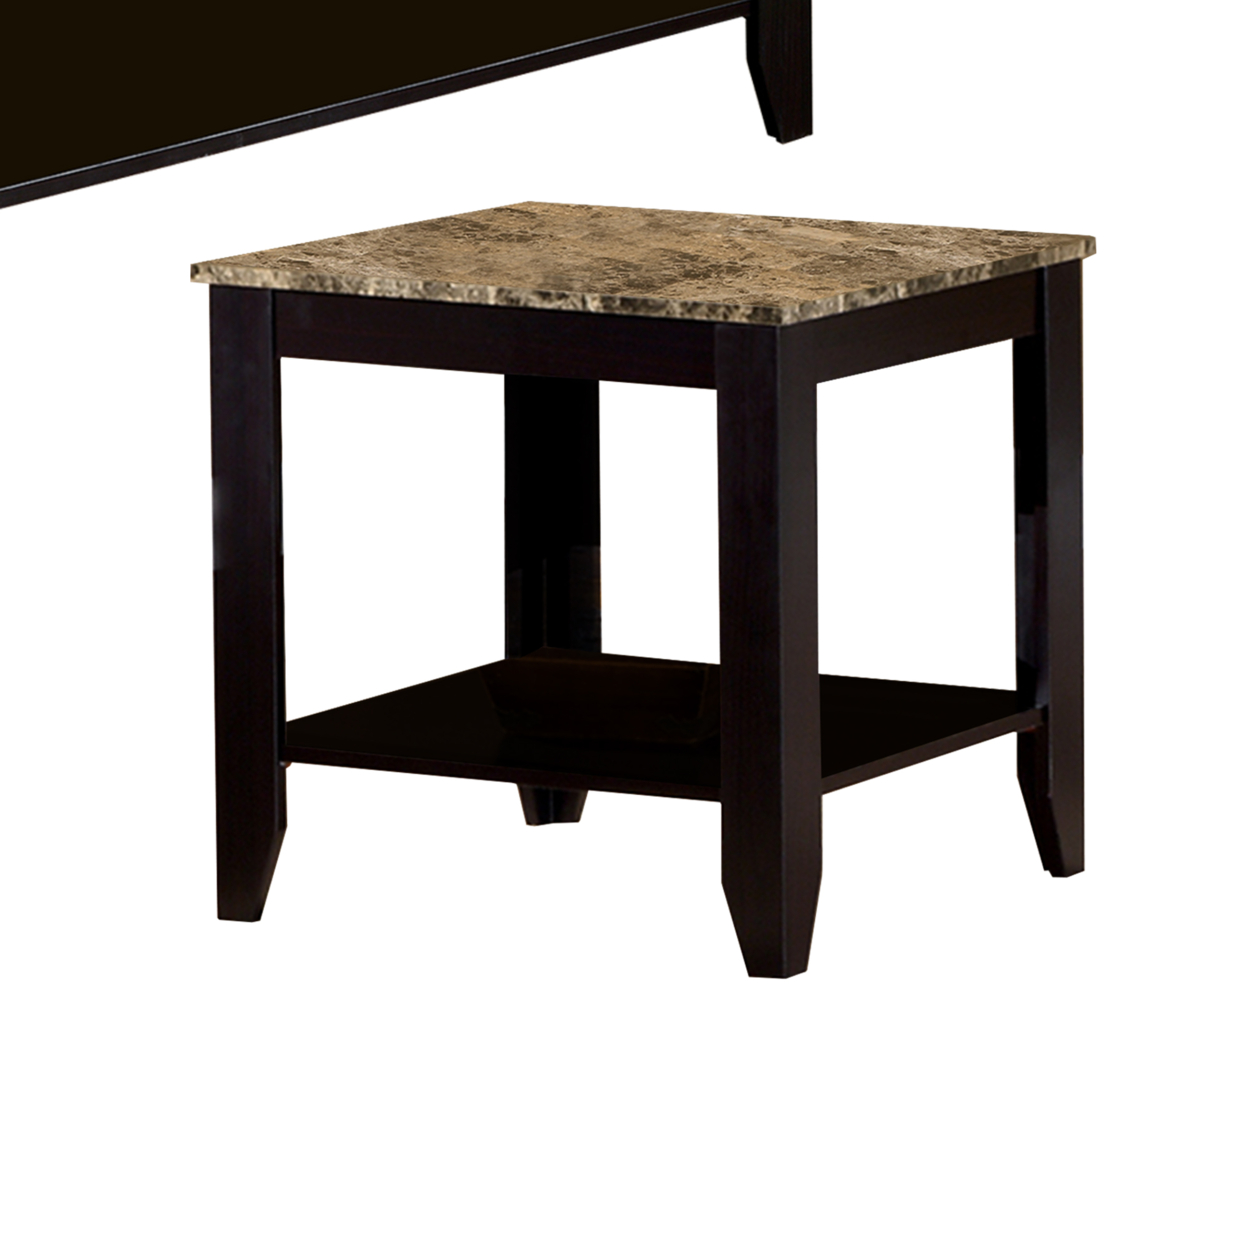 Artistic 3 Piece Occasional Table Set With Marble Top, Brown- Saltoro Sherpi